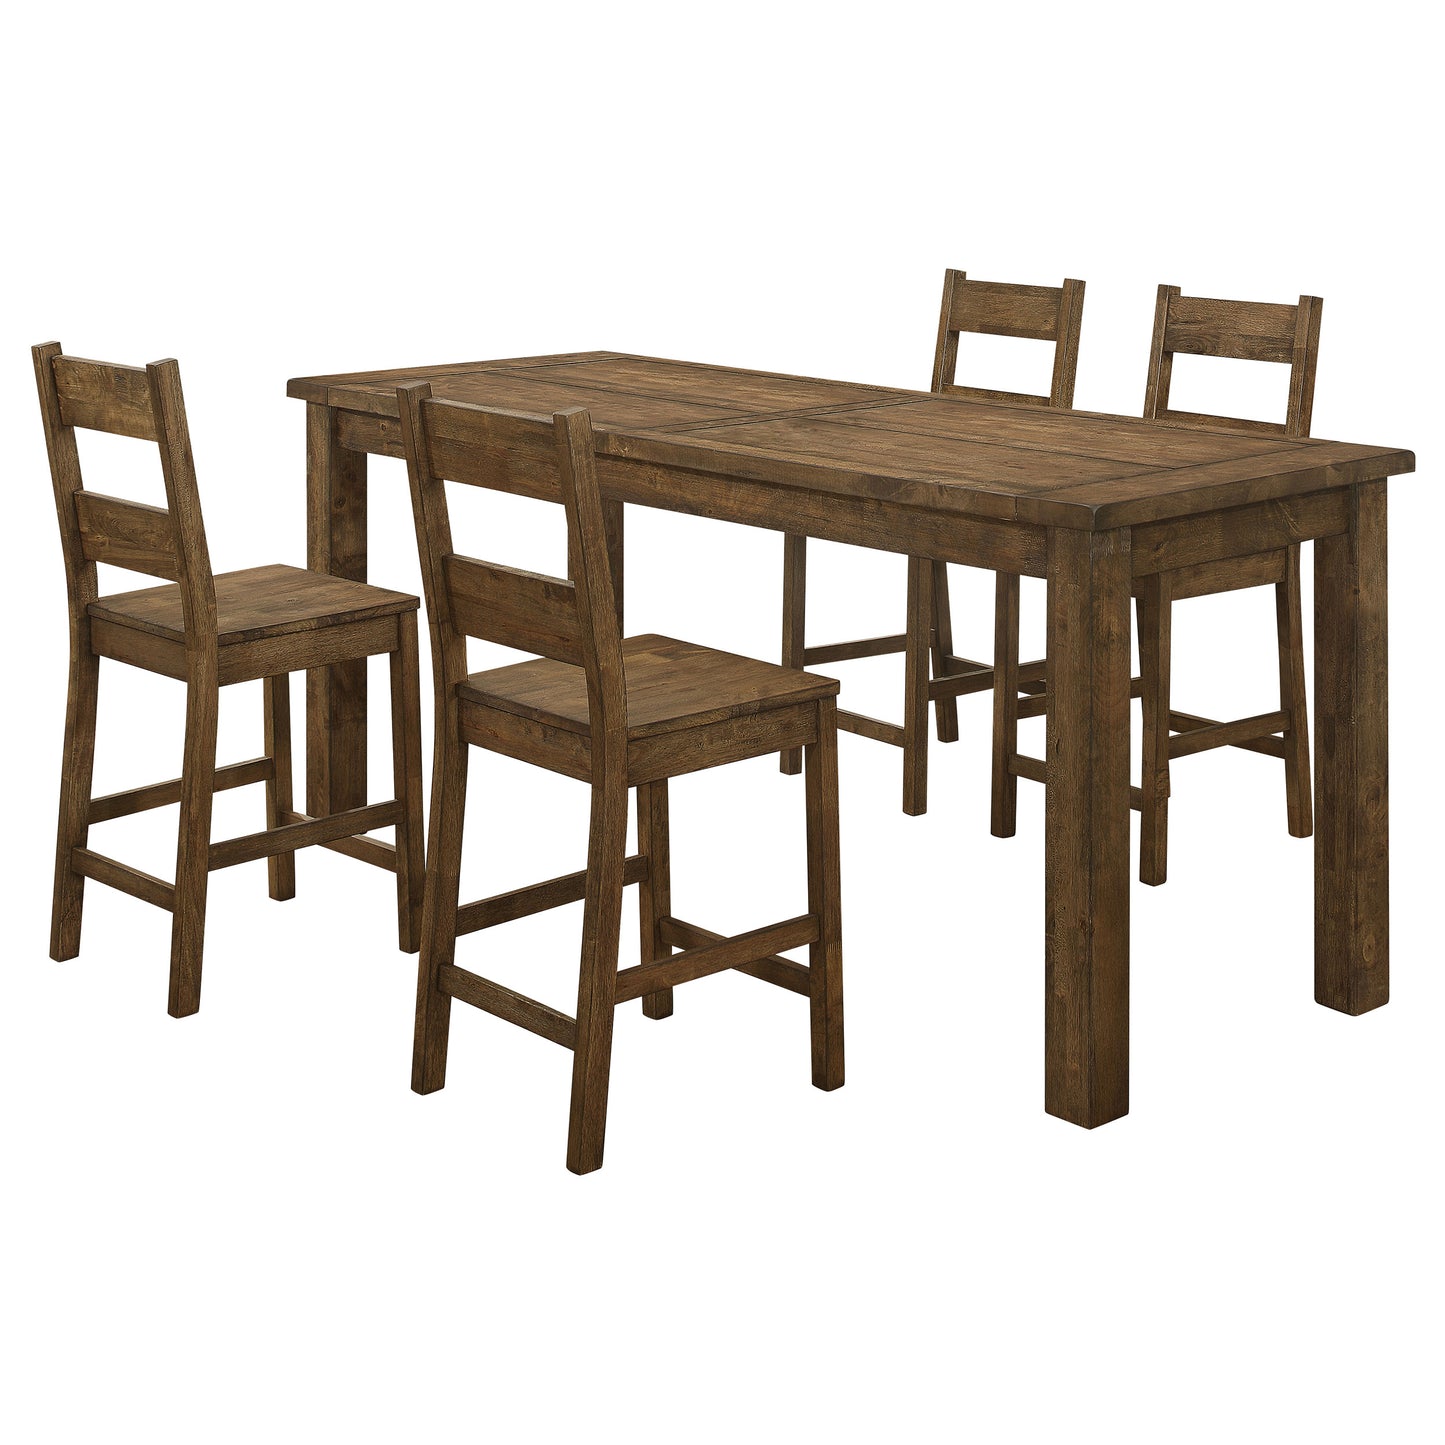 Coleman 5-piece Counter Height Dining Set Rustic Golden Brown